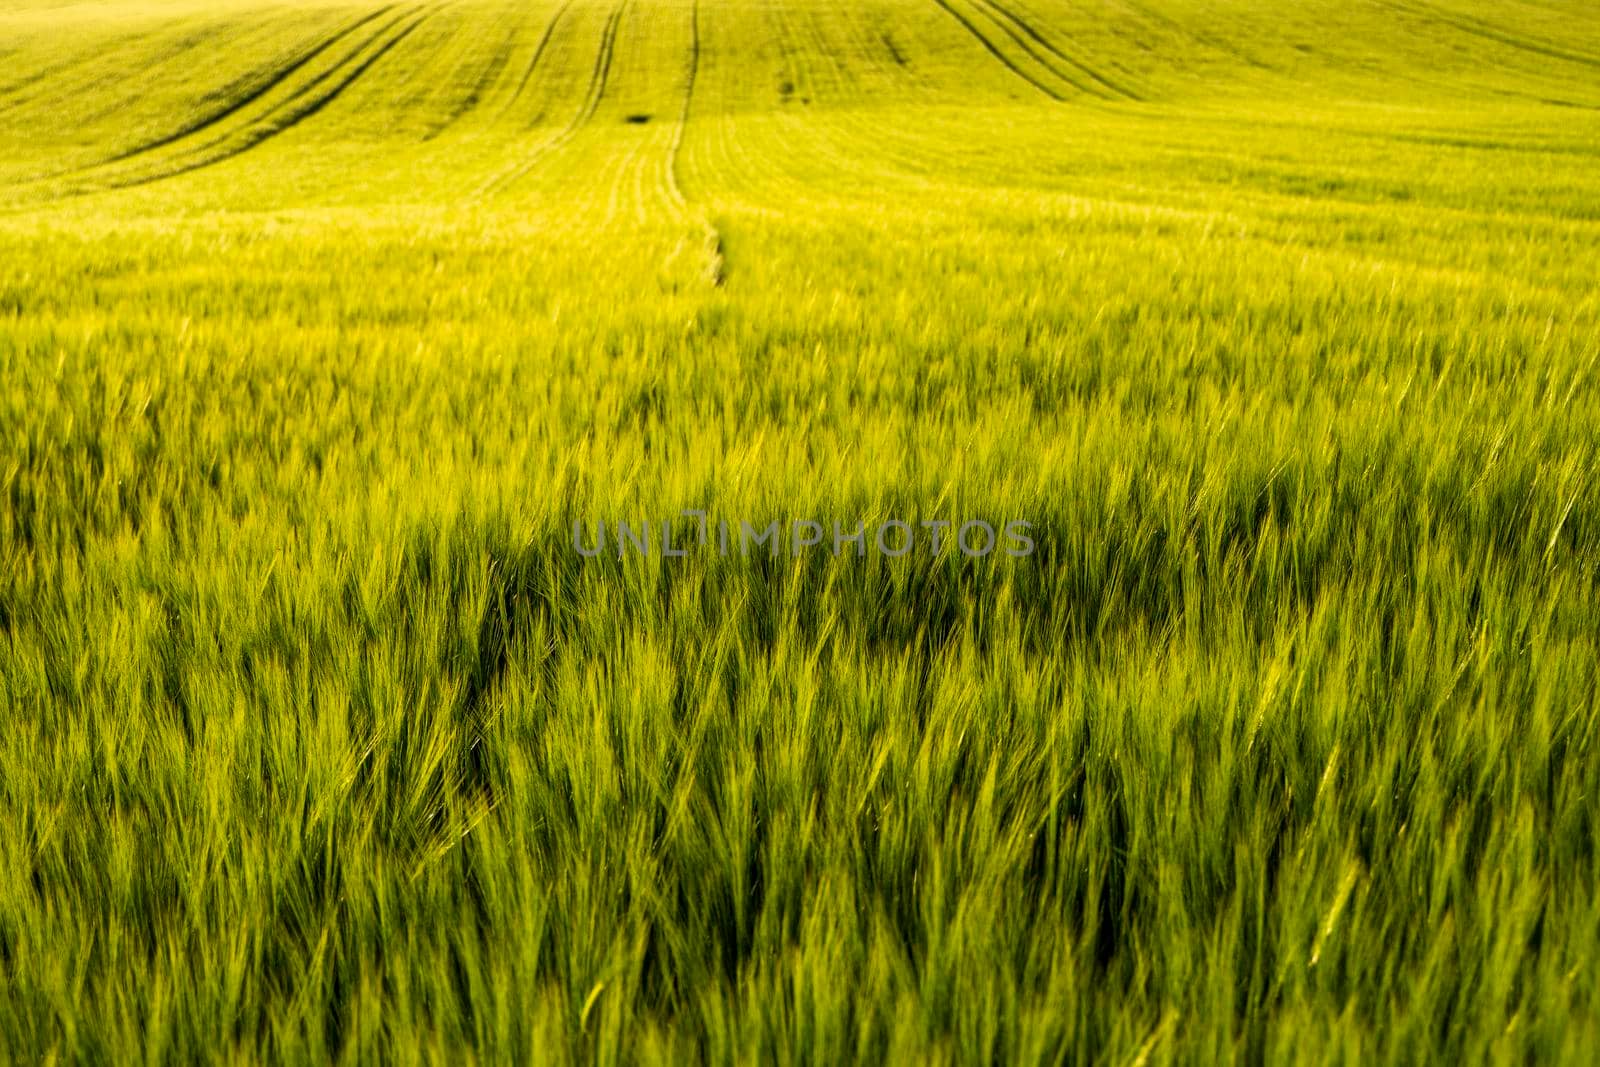 Landskape of an agricultural field with a green barley. Nature. Agricultural proces of growing cerals